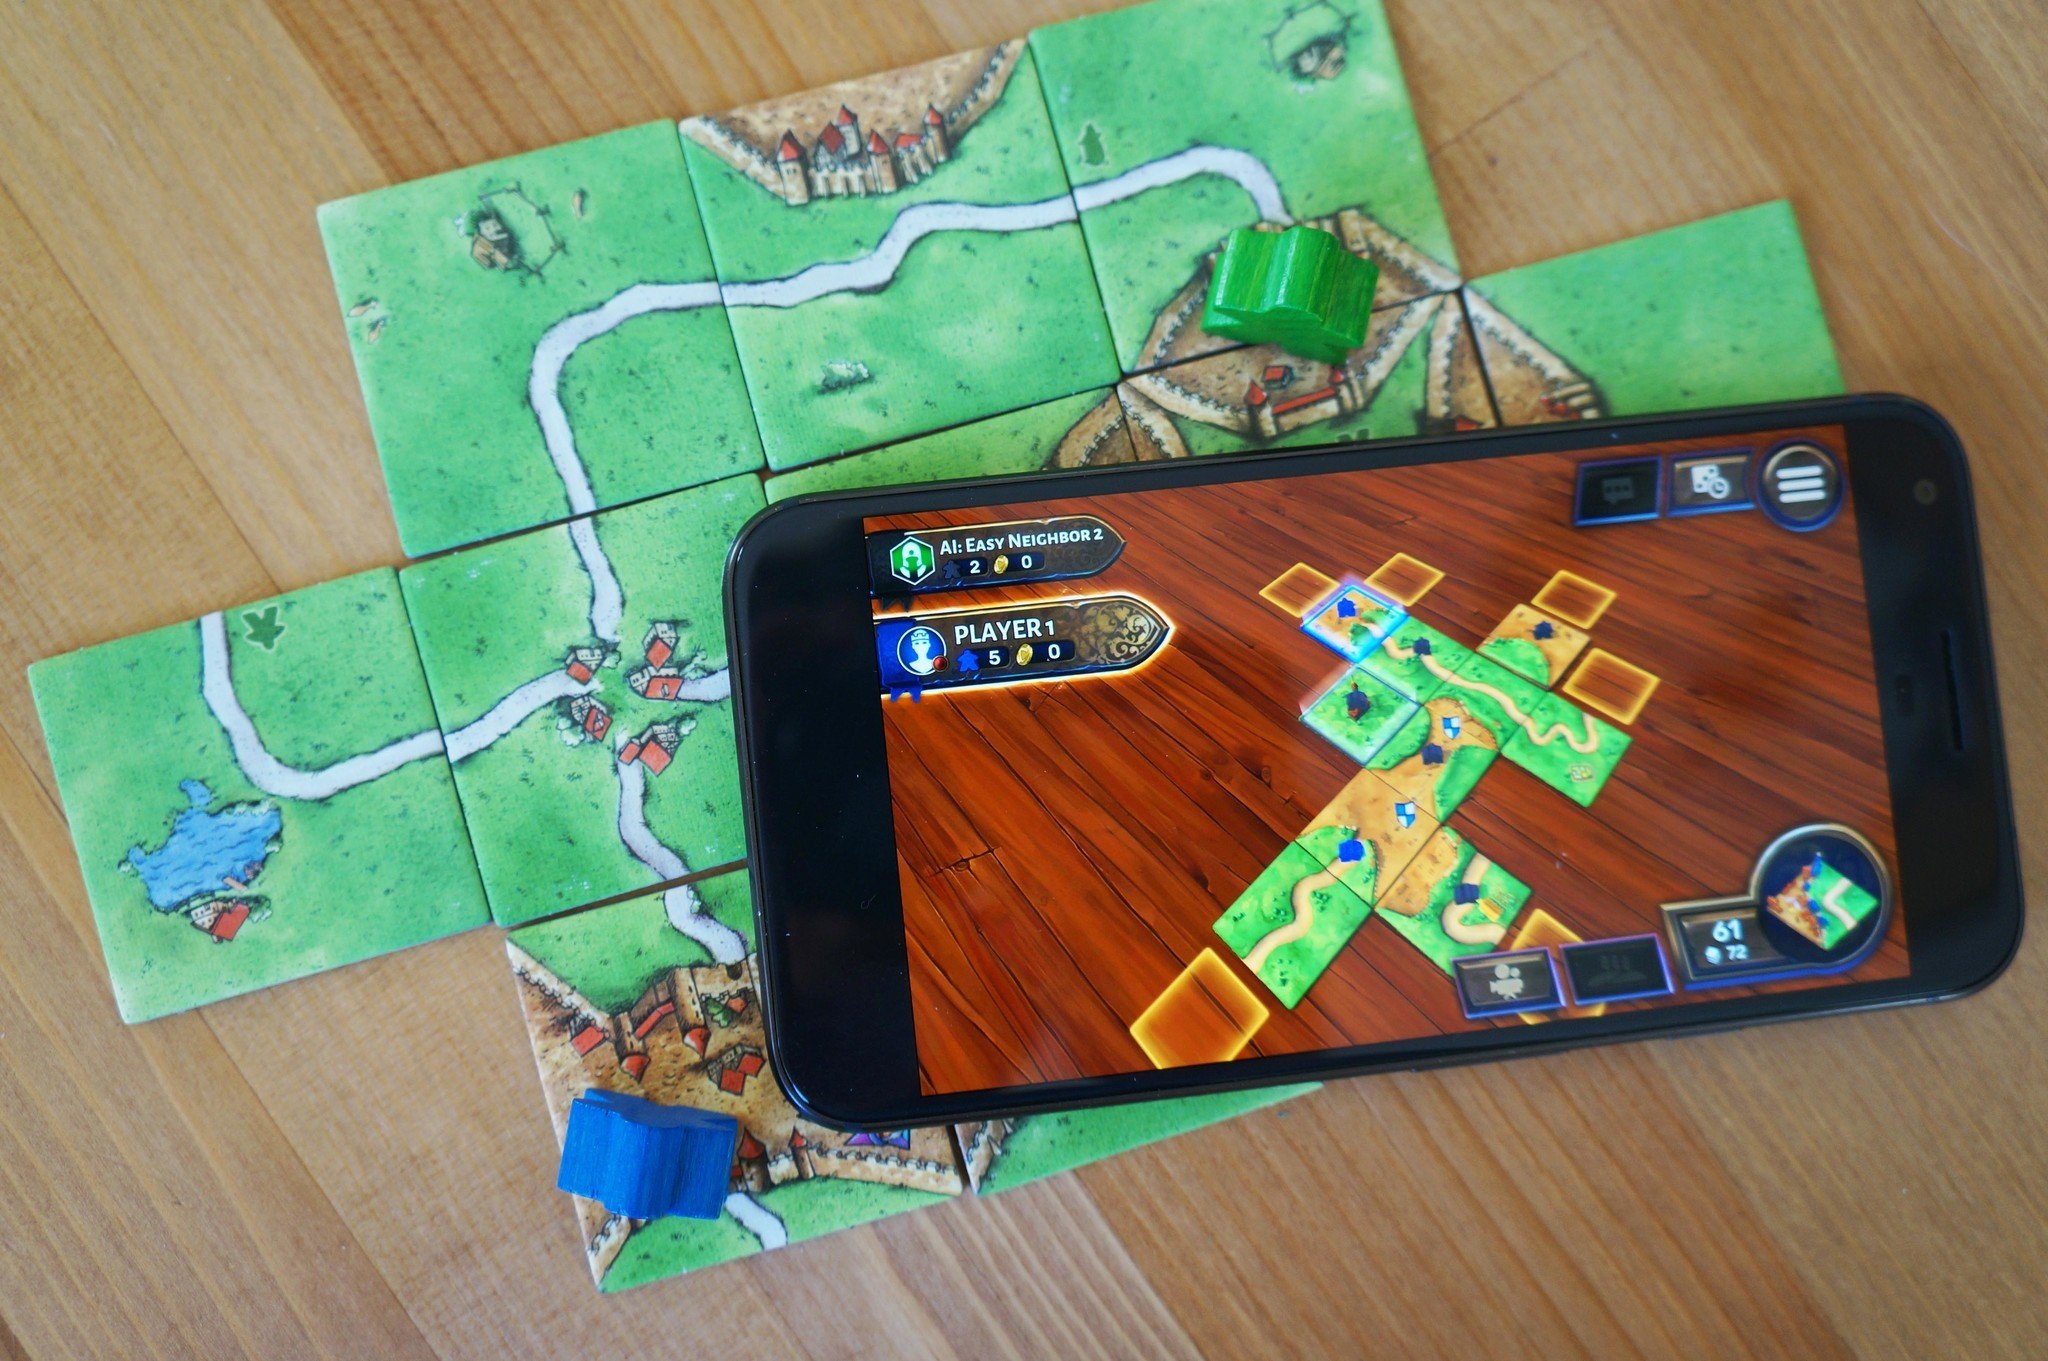 Get geeky with these awesome Android board games